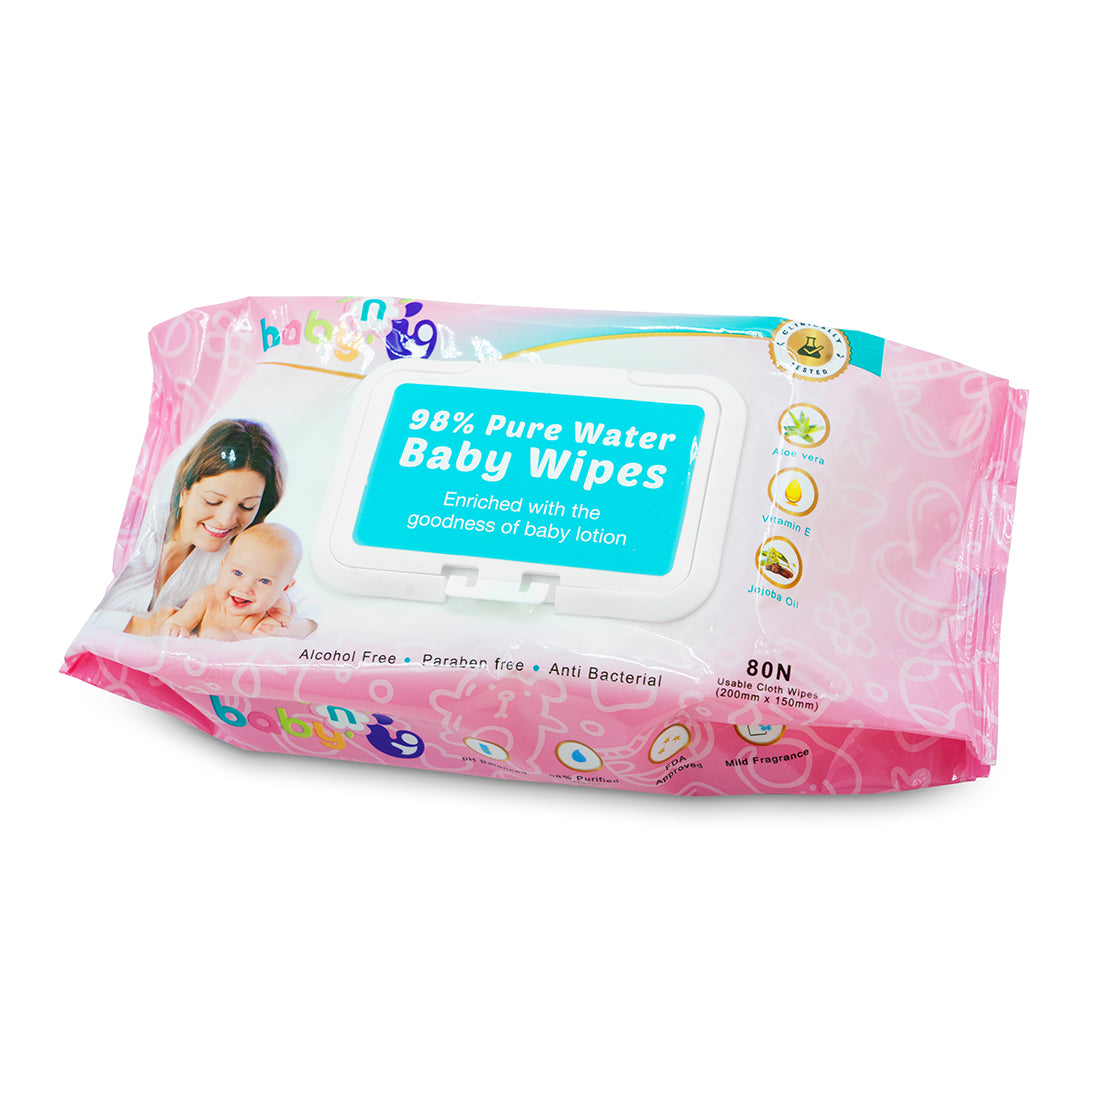 98% Pure Water Baby Wipes